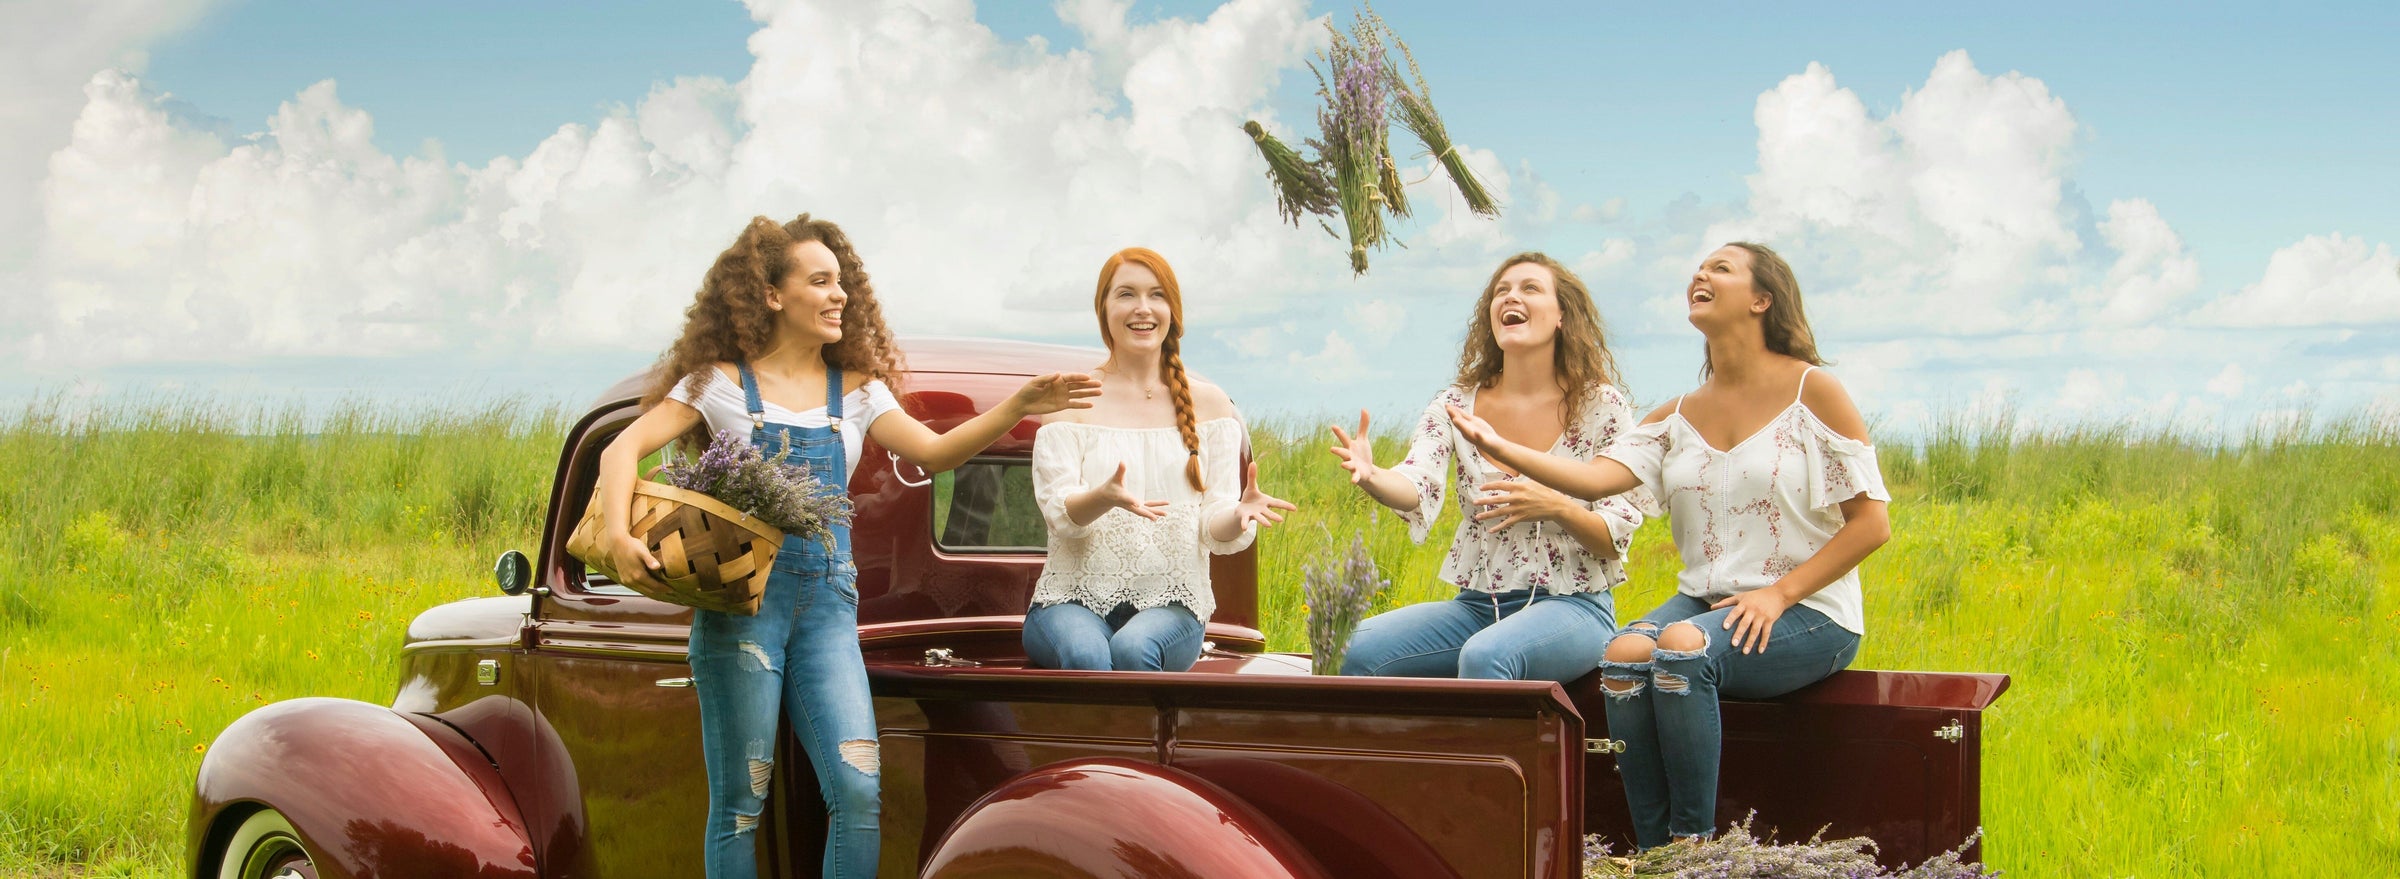 girls in red truck with lavender